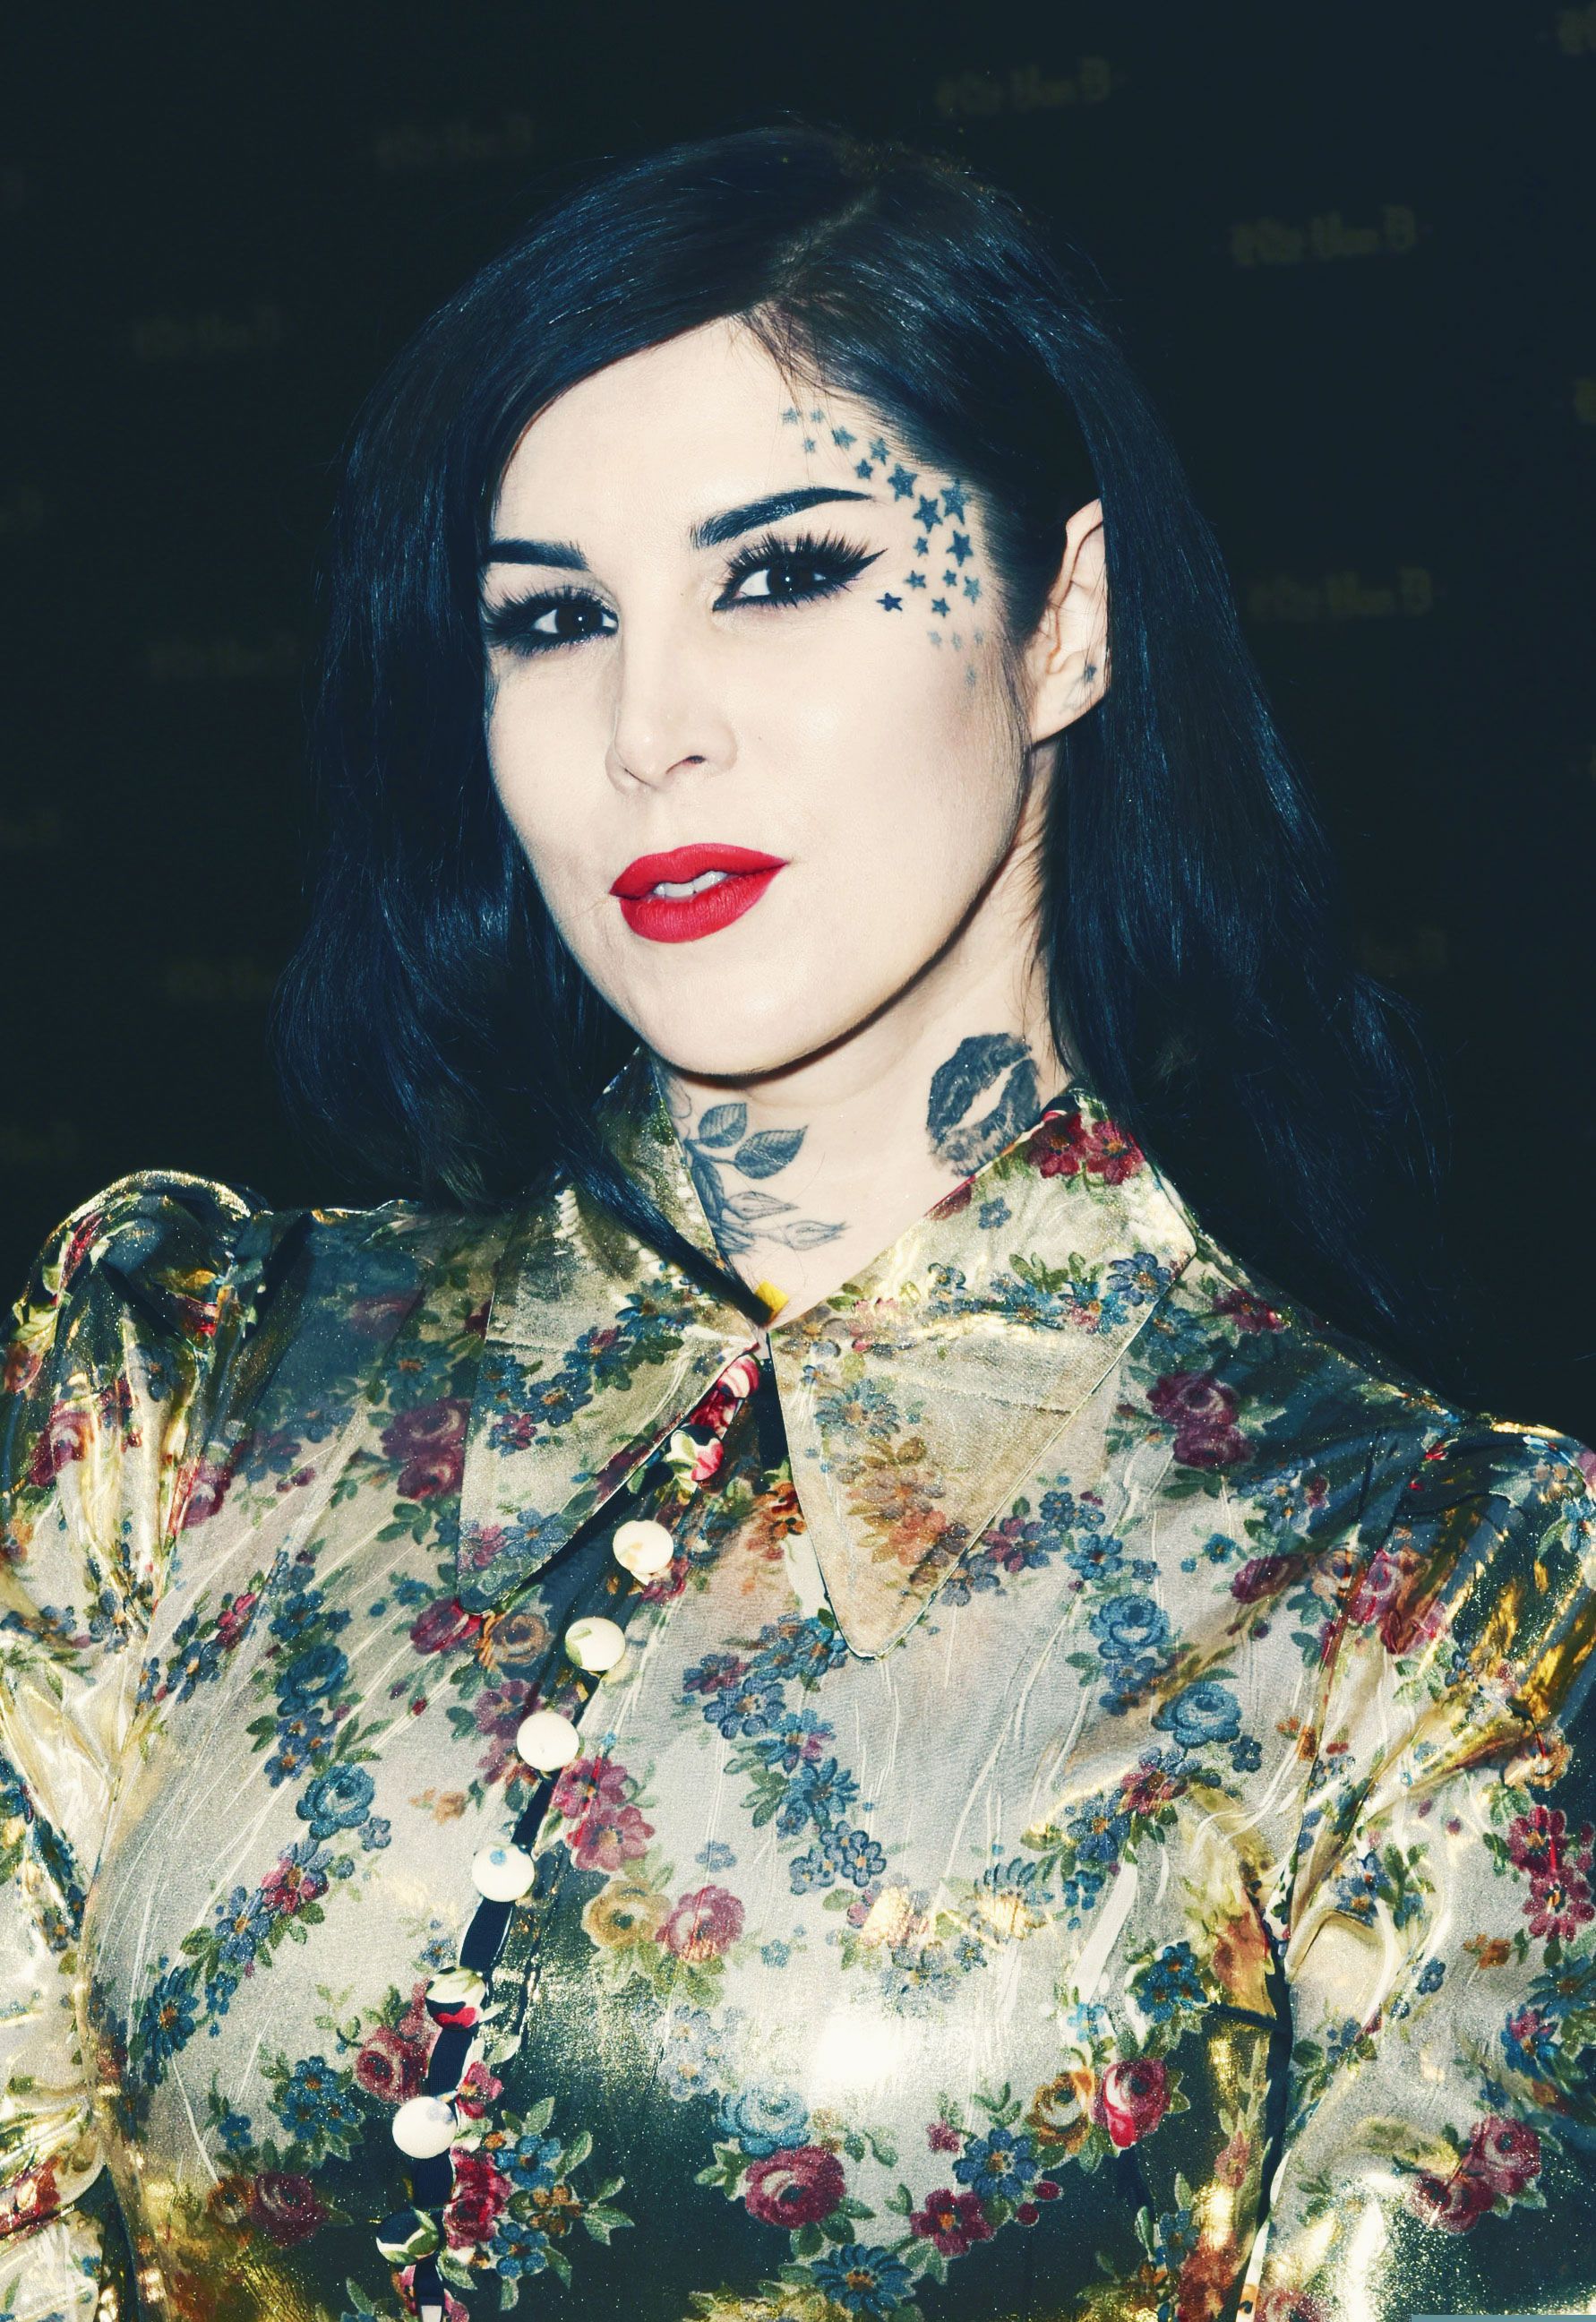 køleskab Anklage Udvidelse Kat Von D Says She's Not a Nazi Nor an Anti-Vaxer in Video